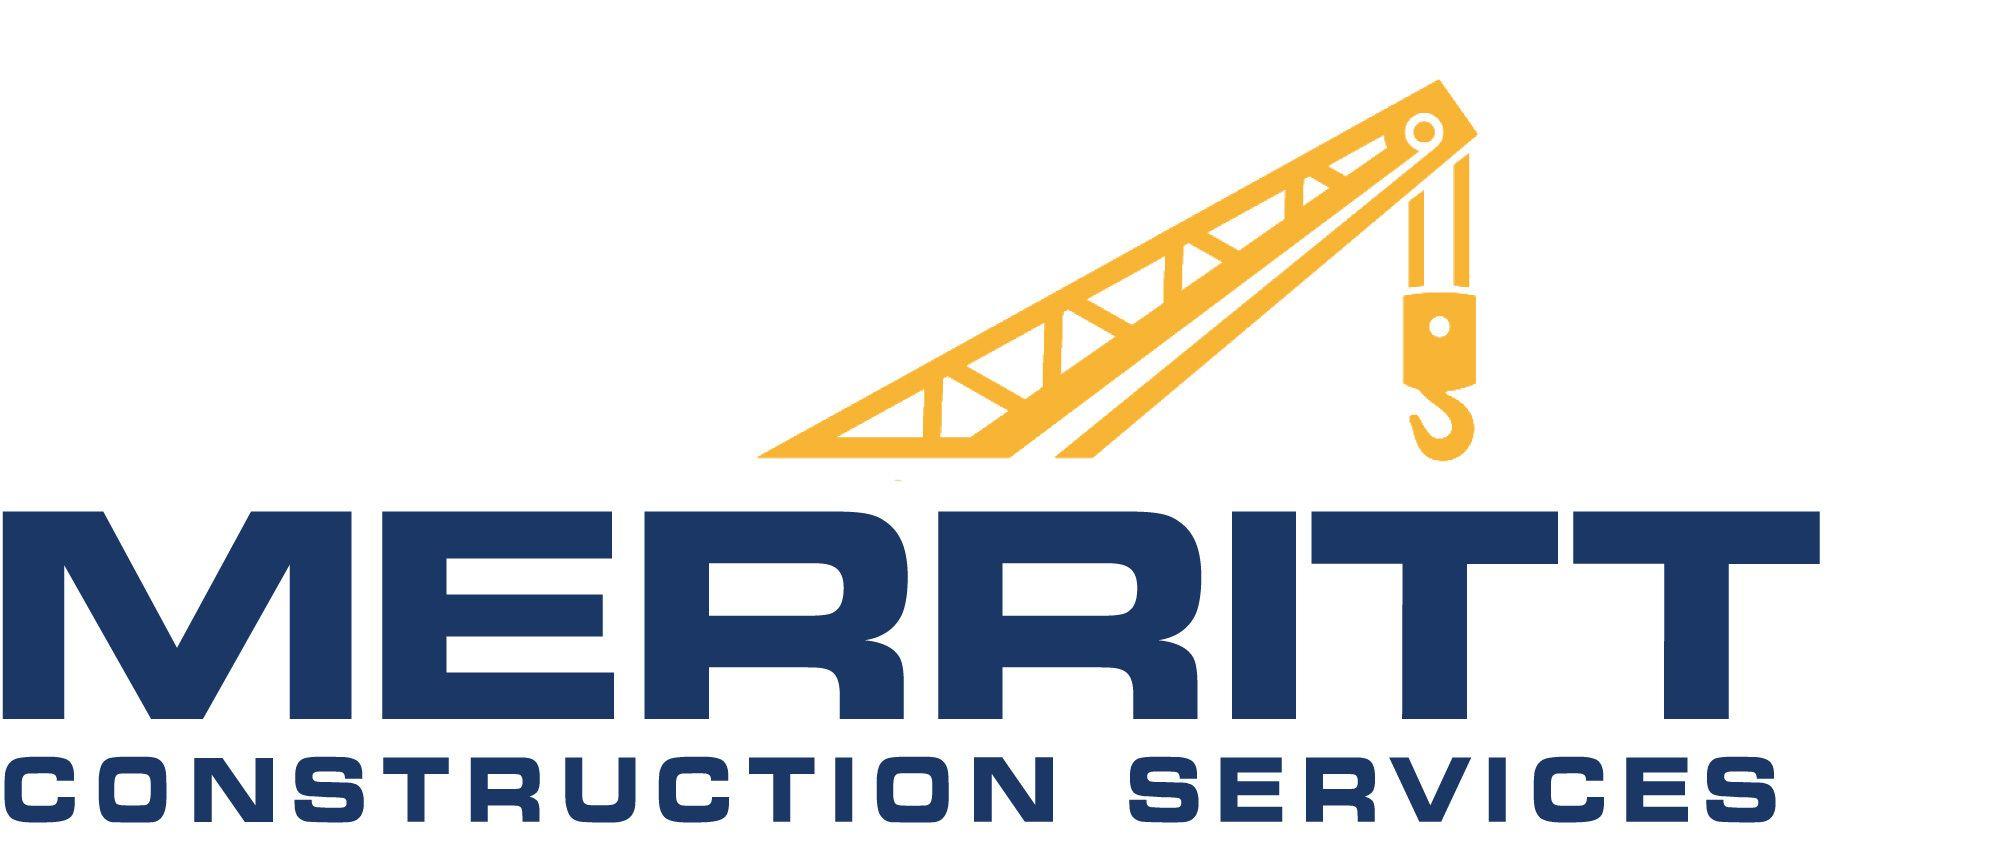 Construction Services Logo - Merritt Construction Services Teams up with Holly Poultry | Business ...